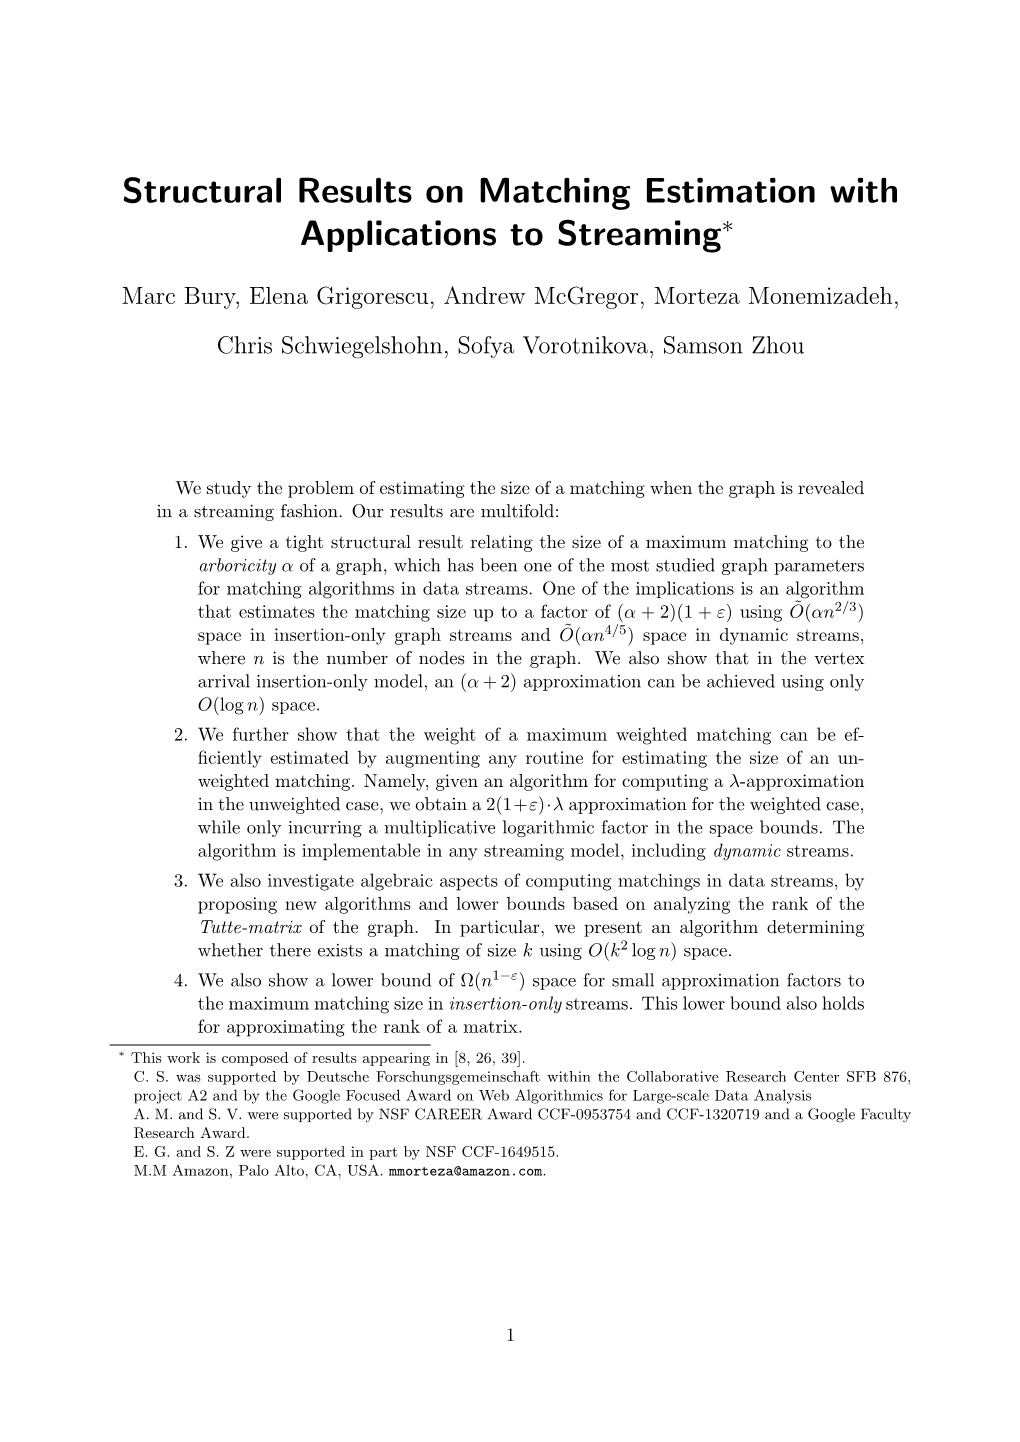 Structural Results on Matching Estimation with Applications to Streaming∗